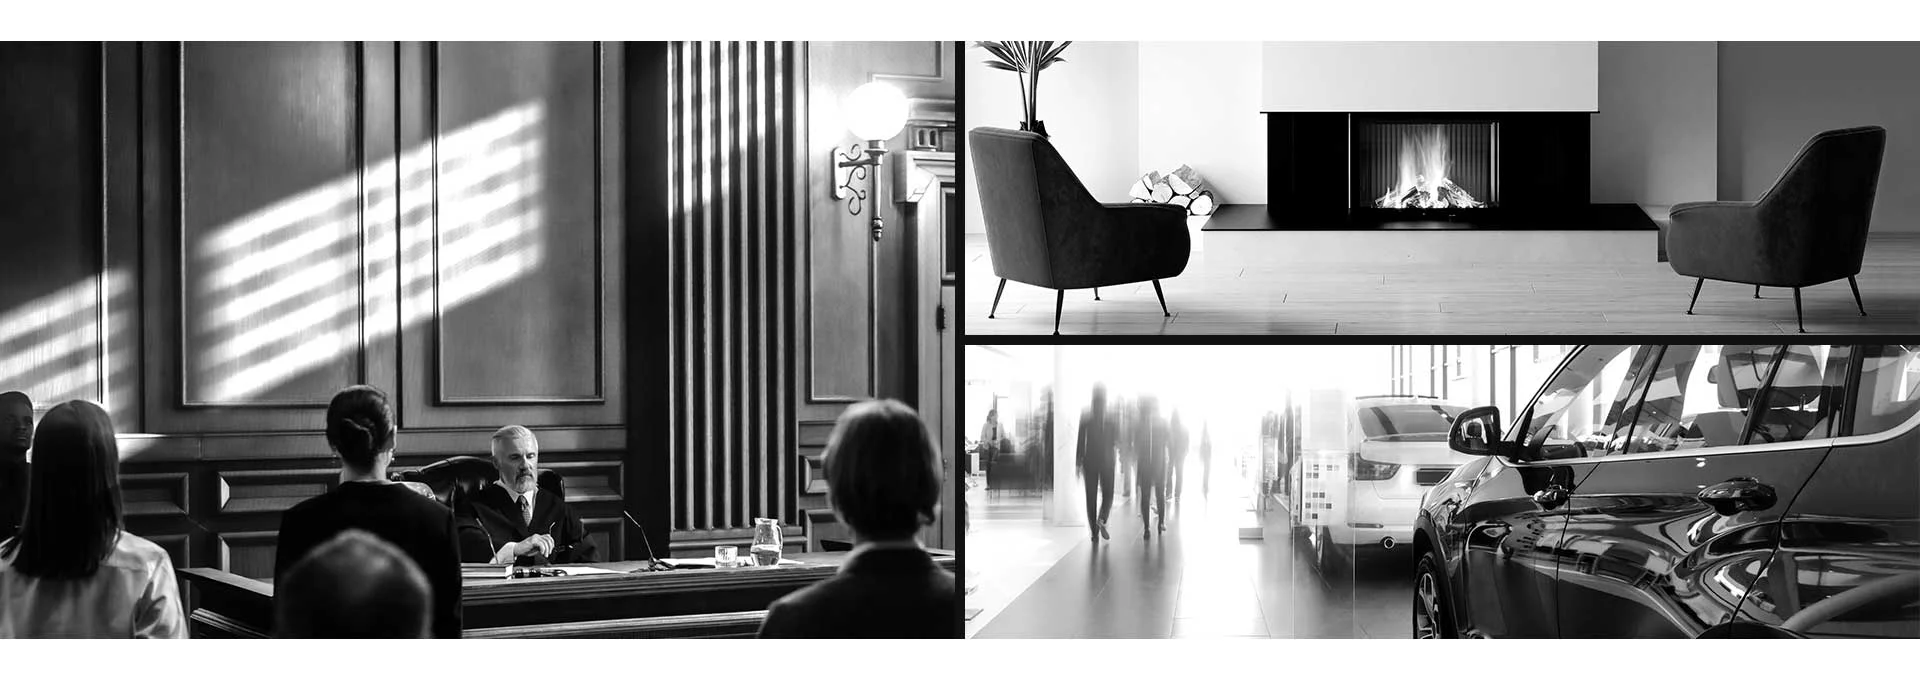 A grid of images showing a judge, fireplace and cars